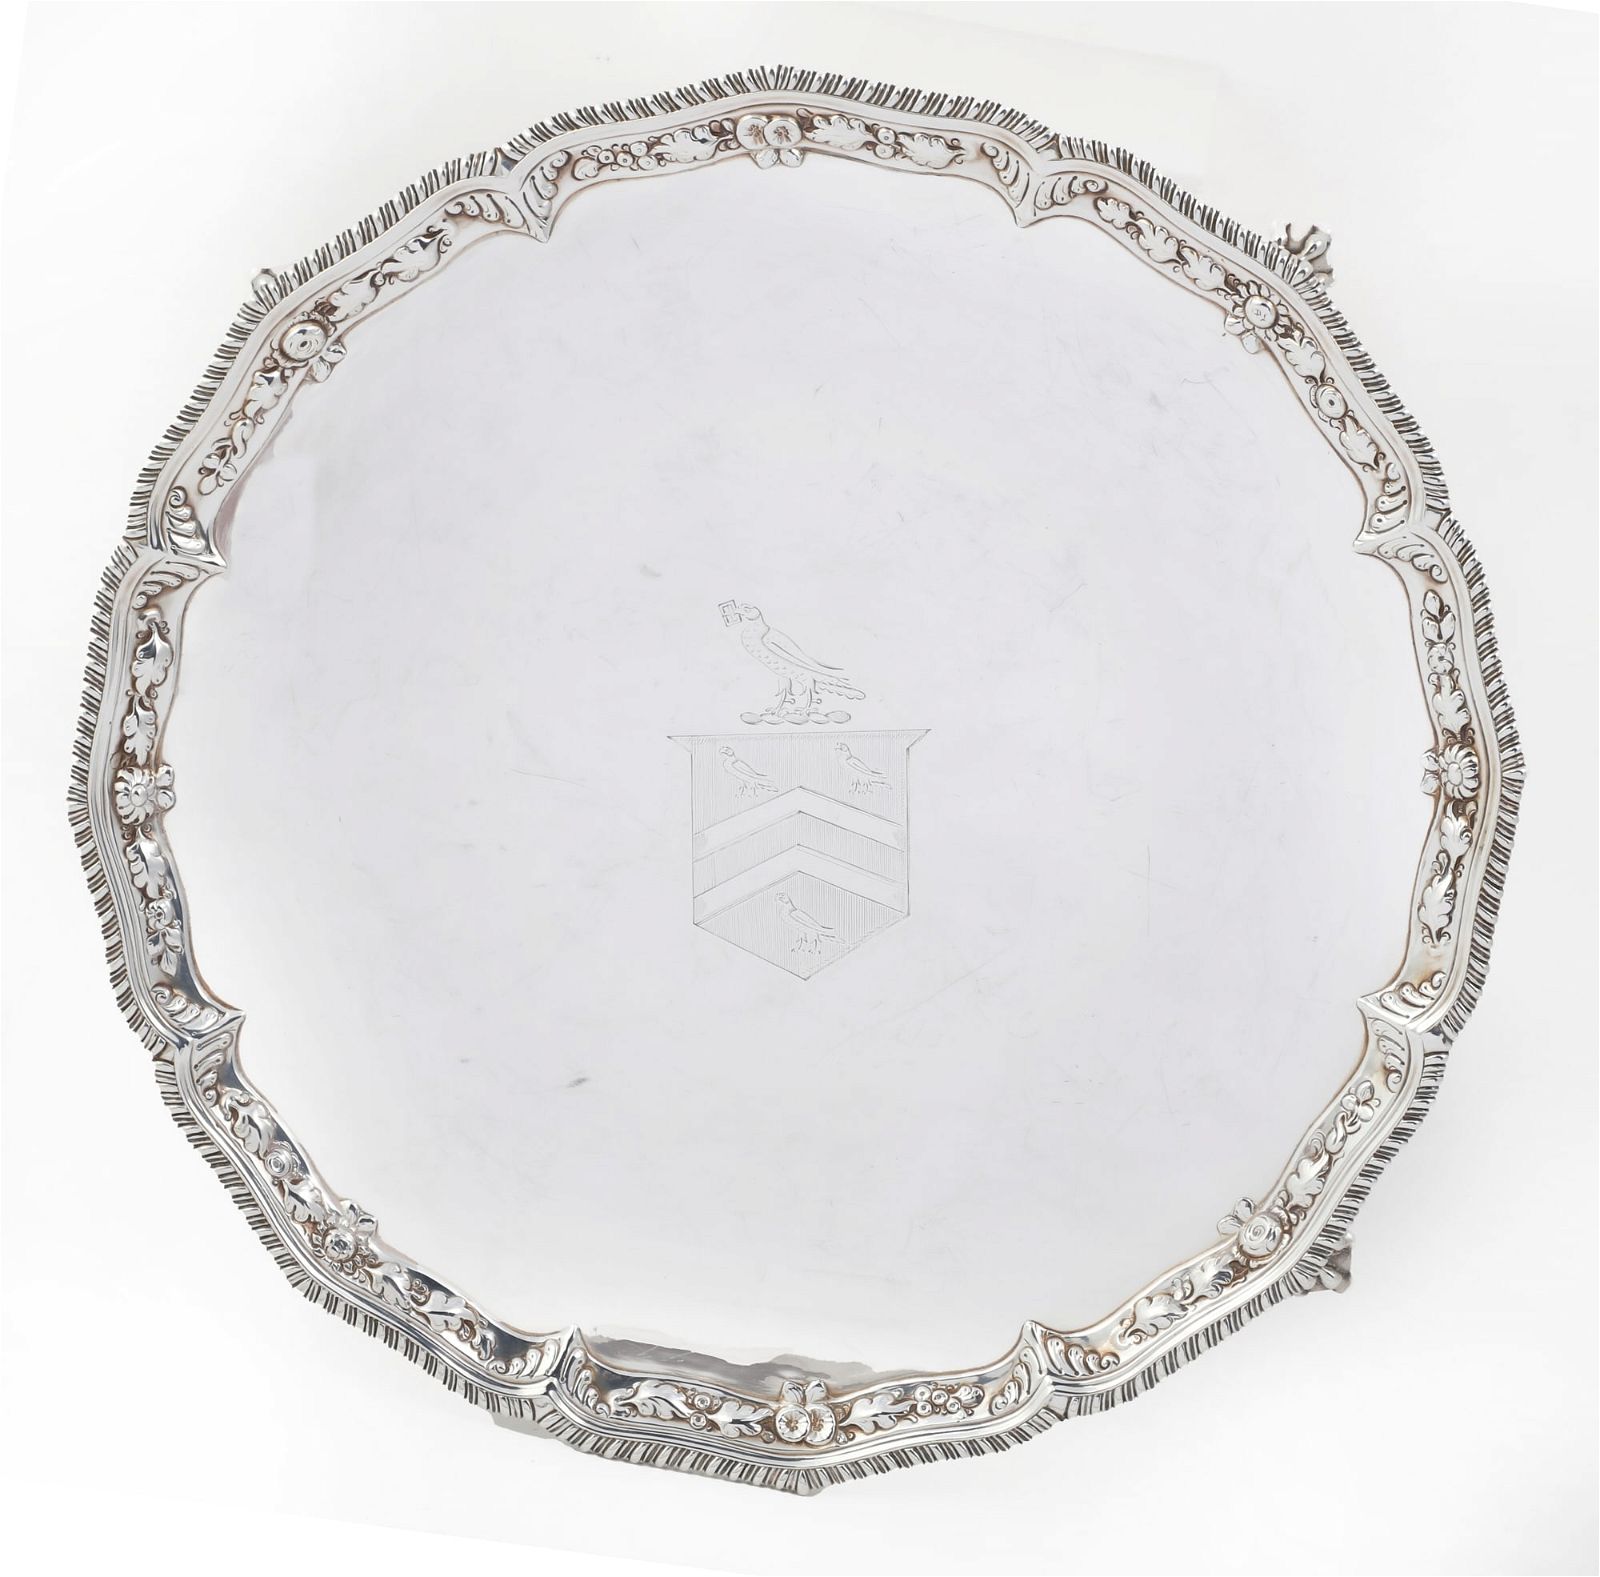 A GEORGE III STERLING SILVER FOOTED